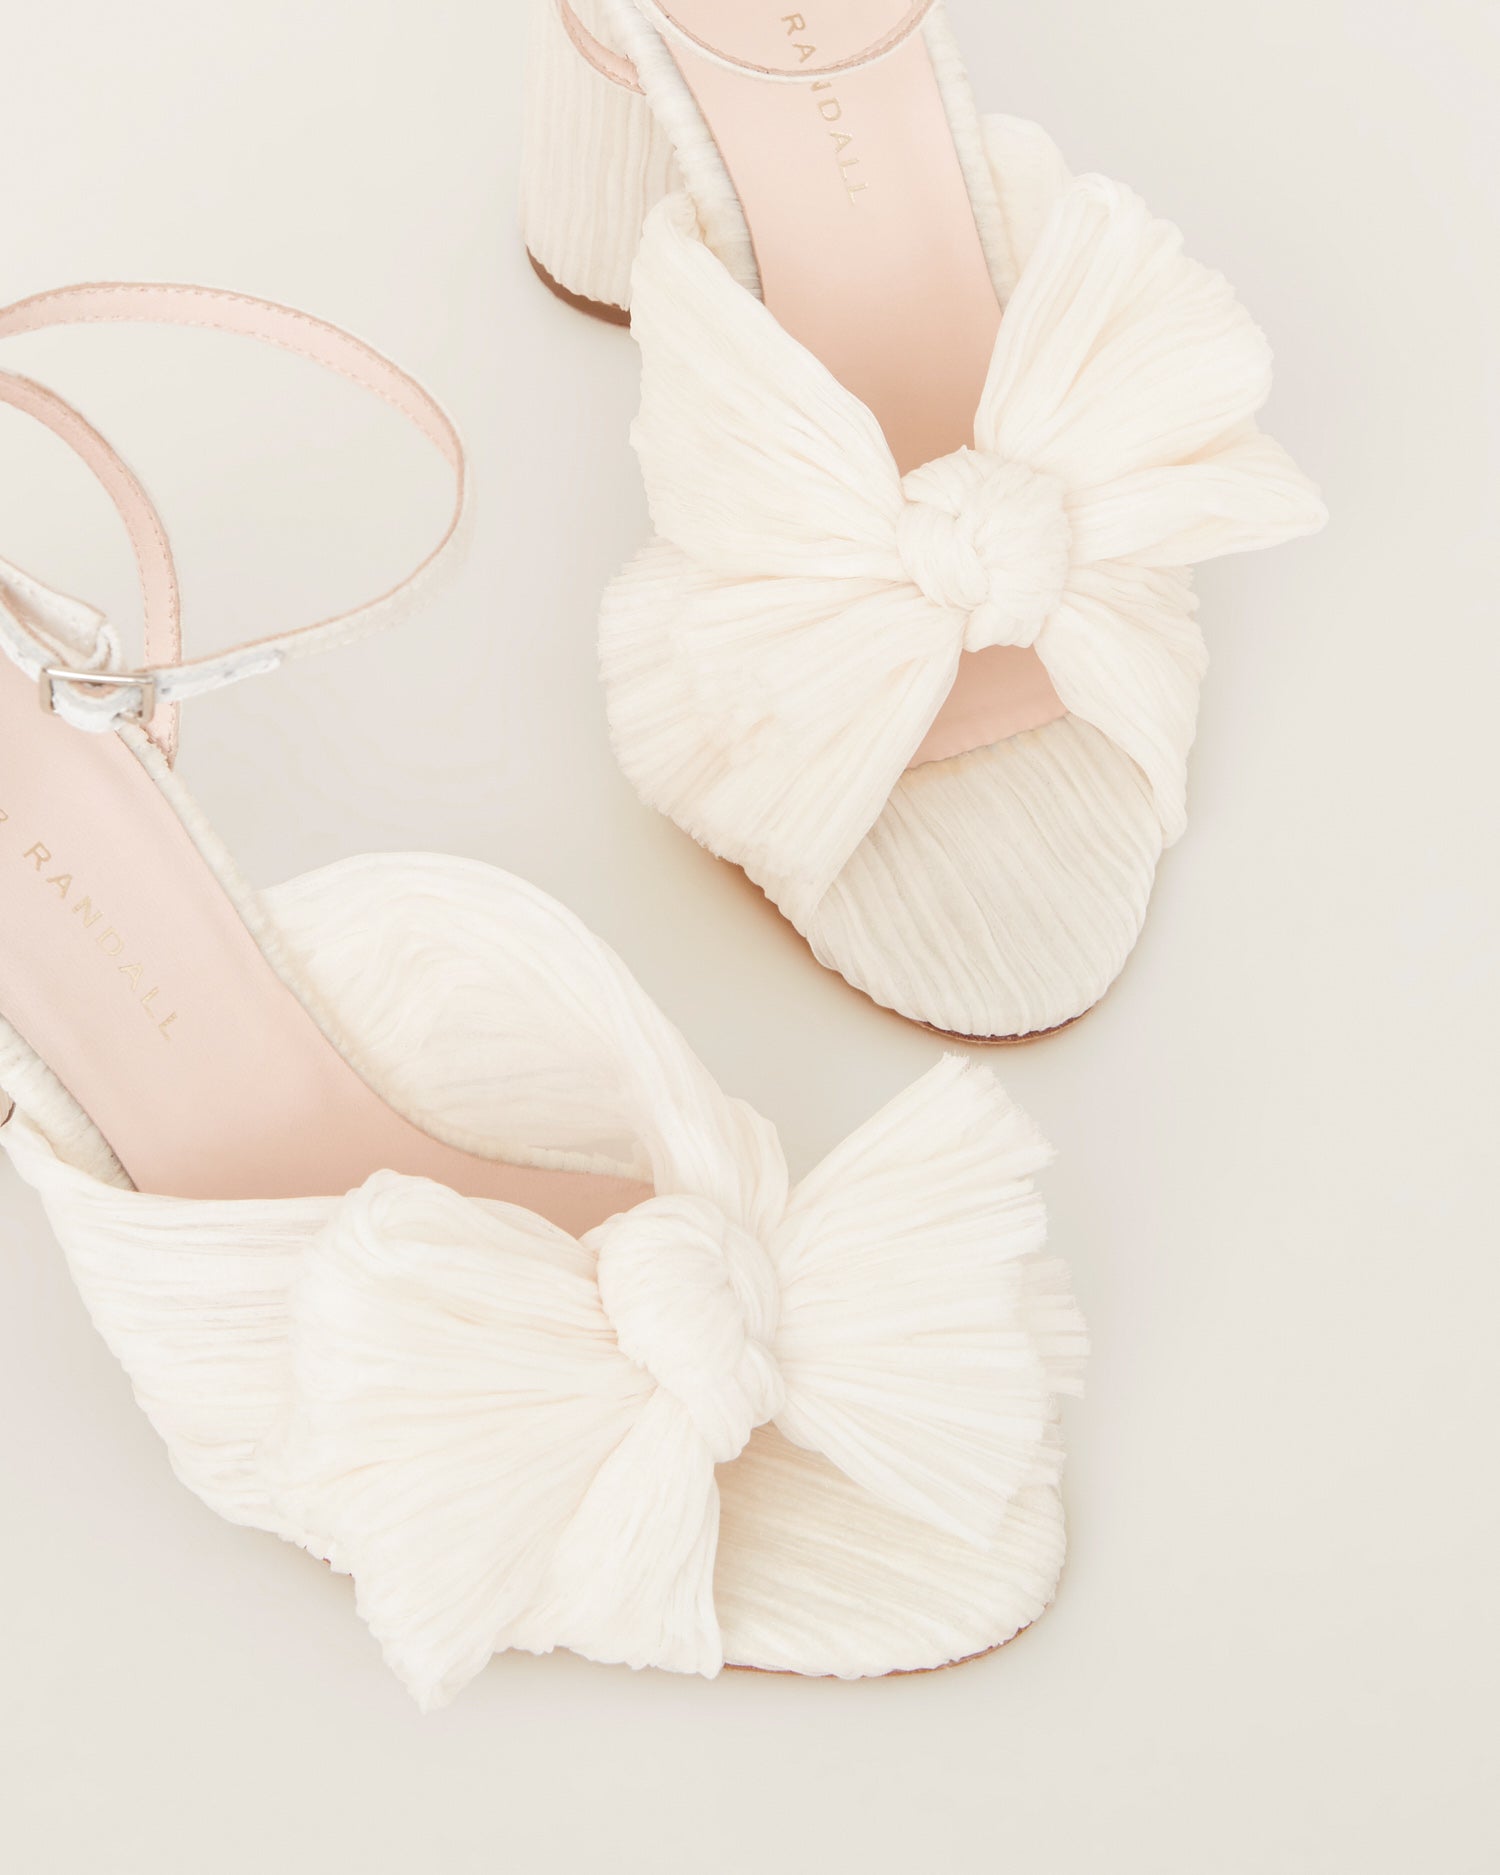 Sole Mates: Loeffler Randall's Jessie Randall And The Most Comfortable  Bridal Shoes . . . Maybe Ever - Over The Moon